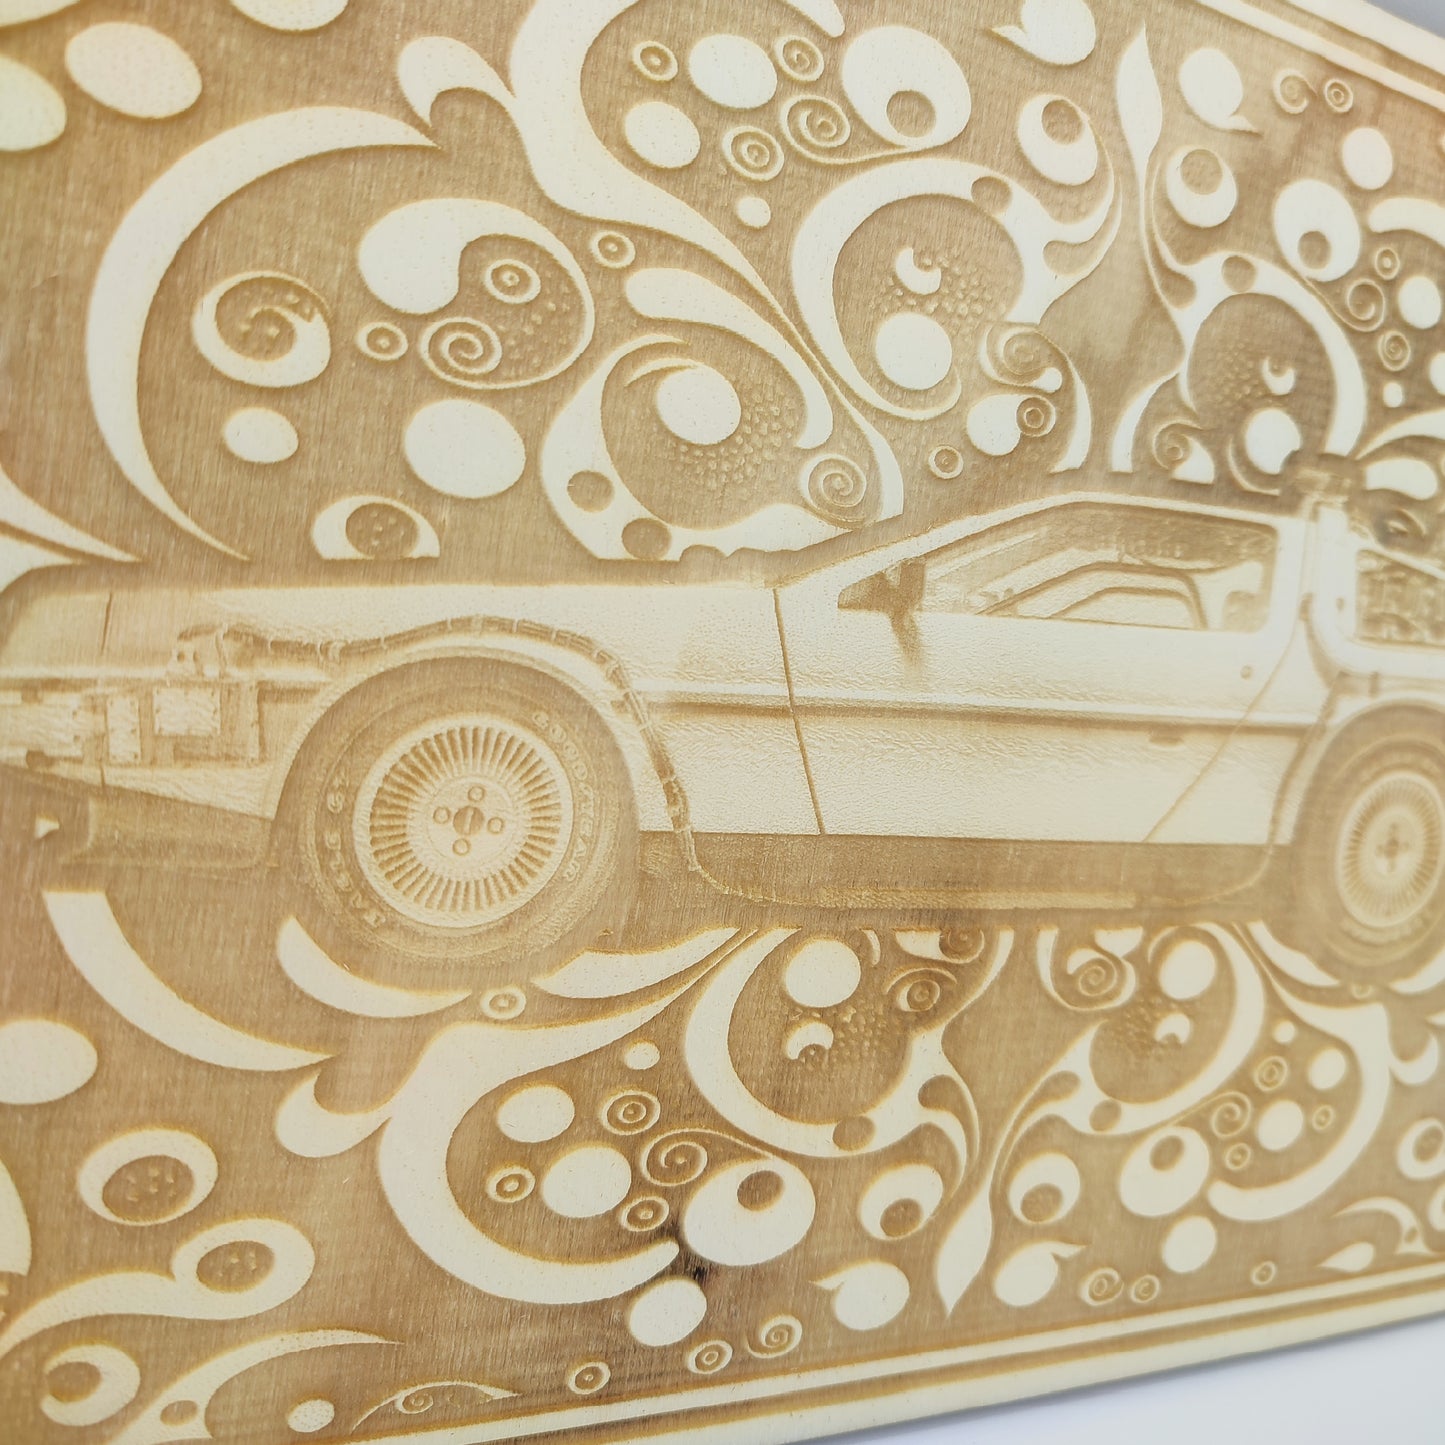 Delorean - Back to the Future - Wood Engraving